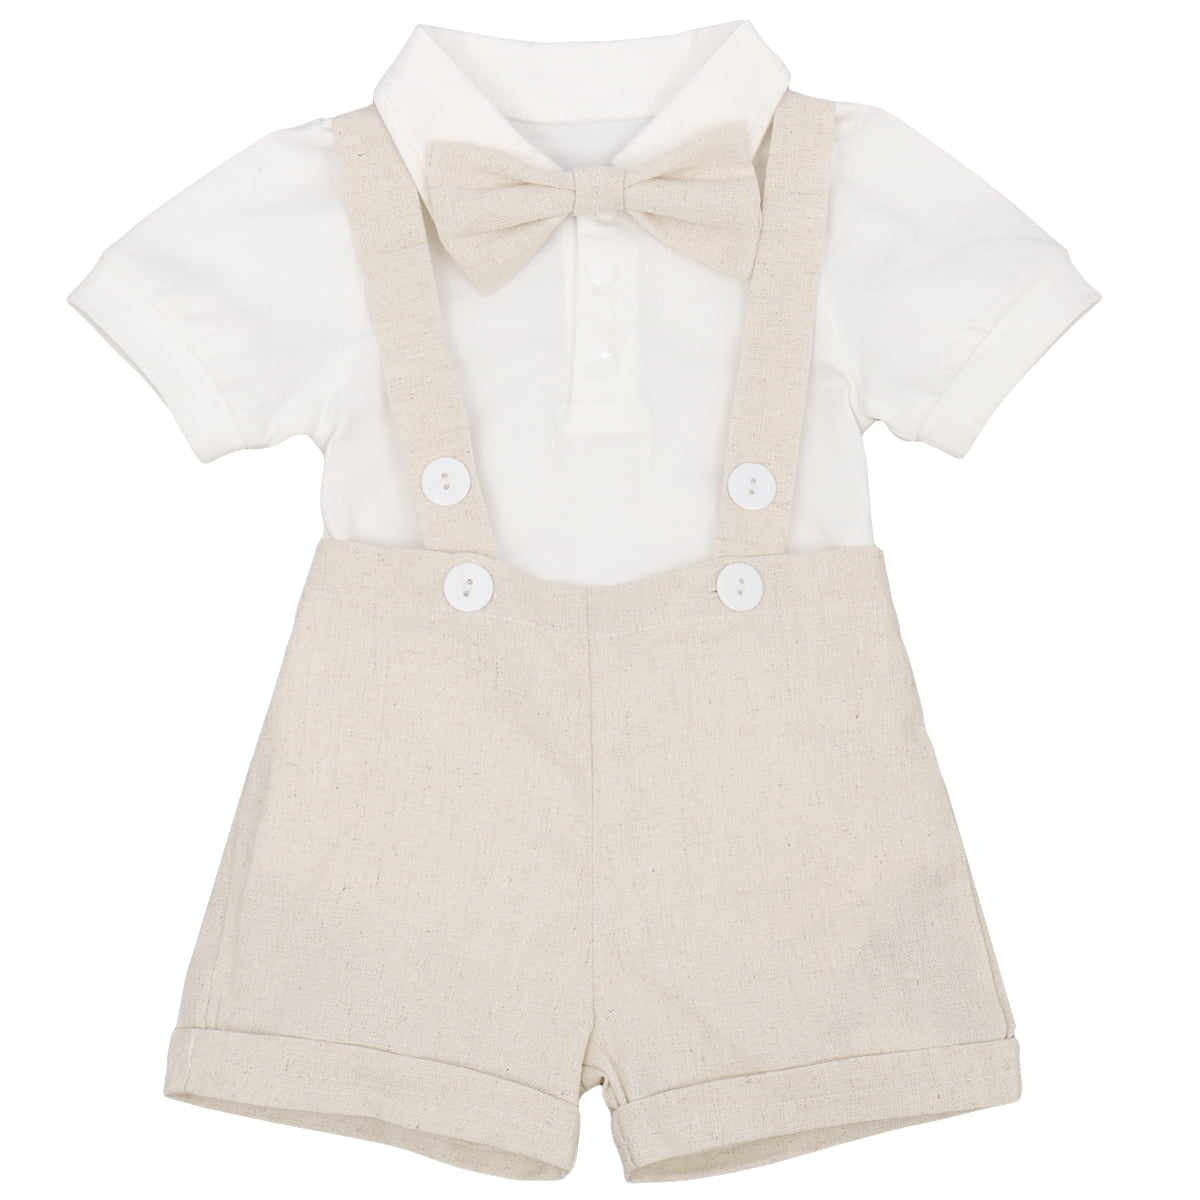 Baby Boy Wedding Christening Tuxedo Suspenders Suits Outfit Clothes Romper 